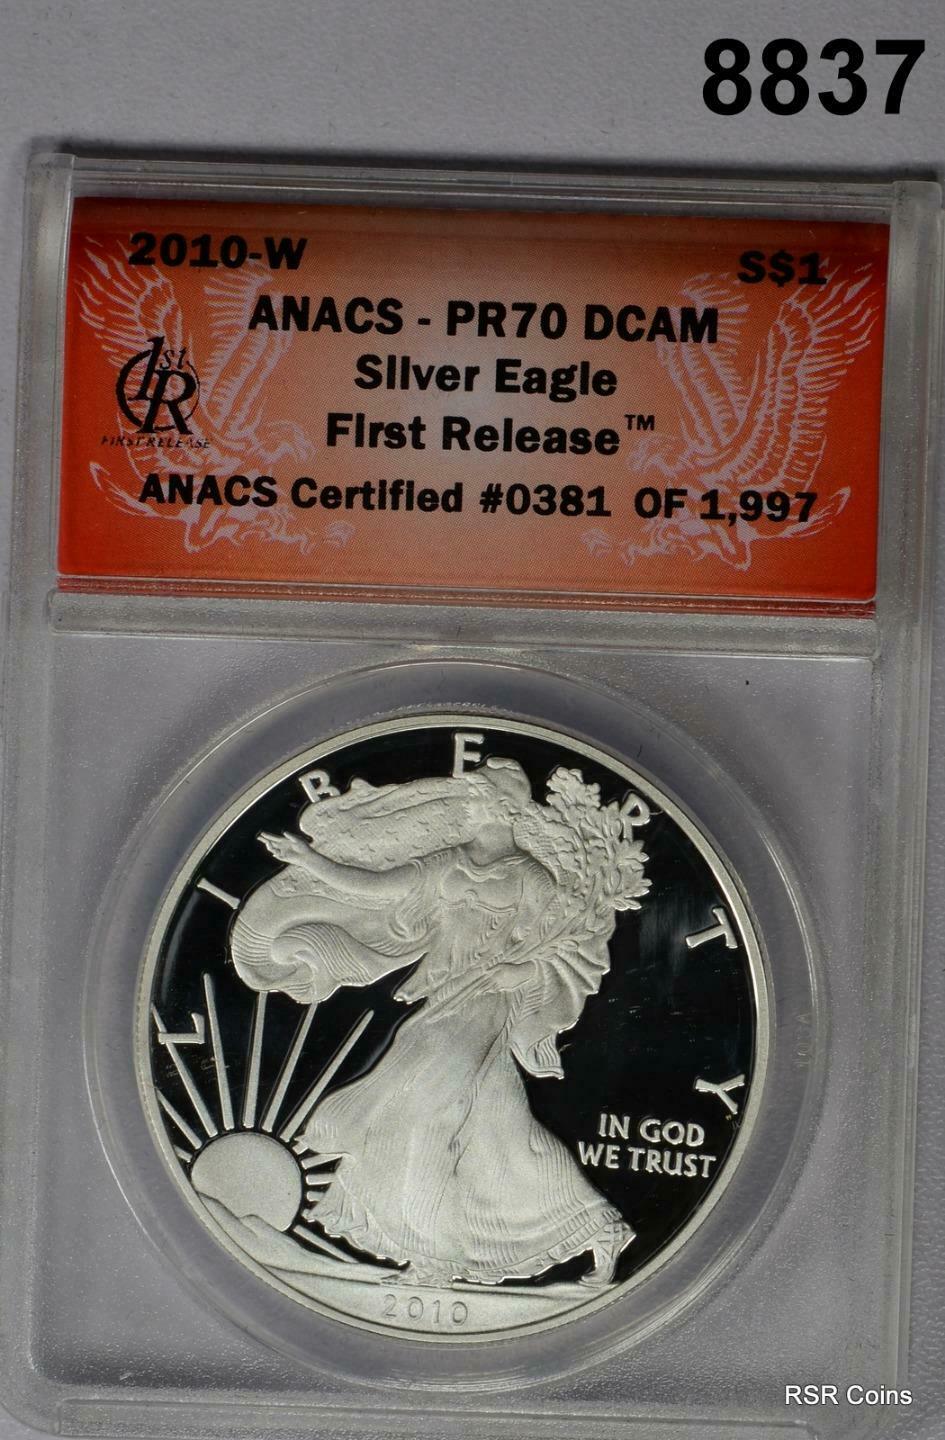 2010 W SILVER EAGLE FIRST RELEASE ANACS CERTIFIED PR70 DCAM IN WOOD BOX! #8837